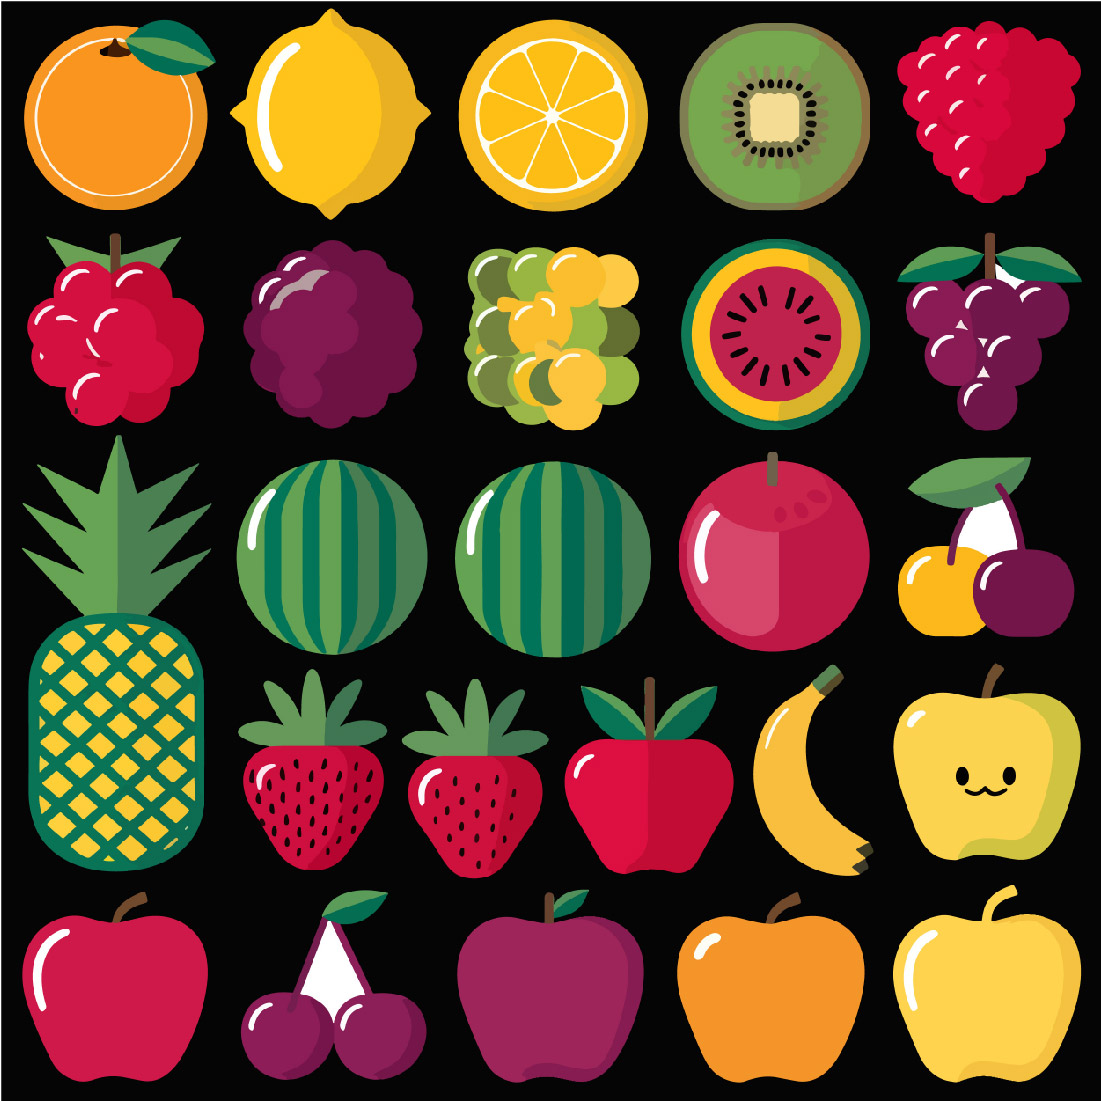 Fruit icons preview image.